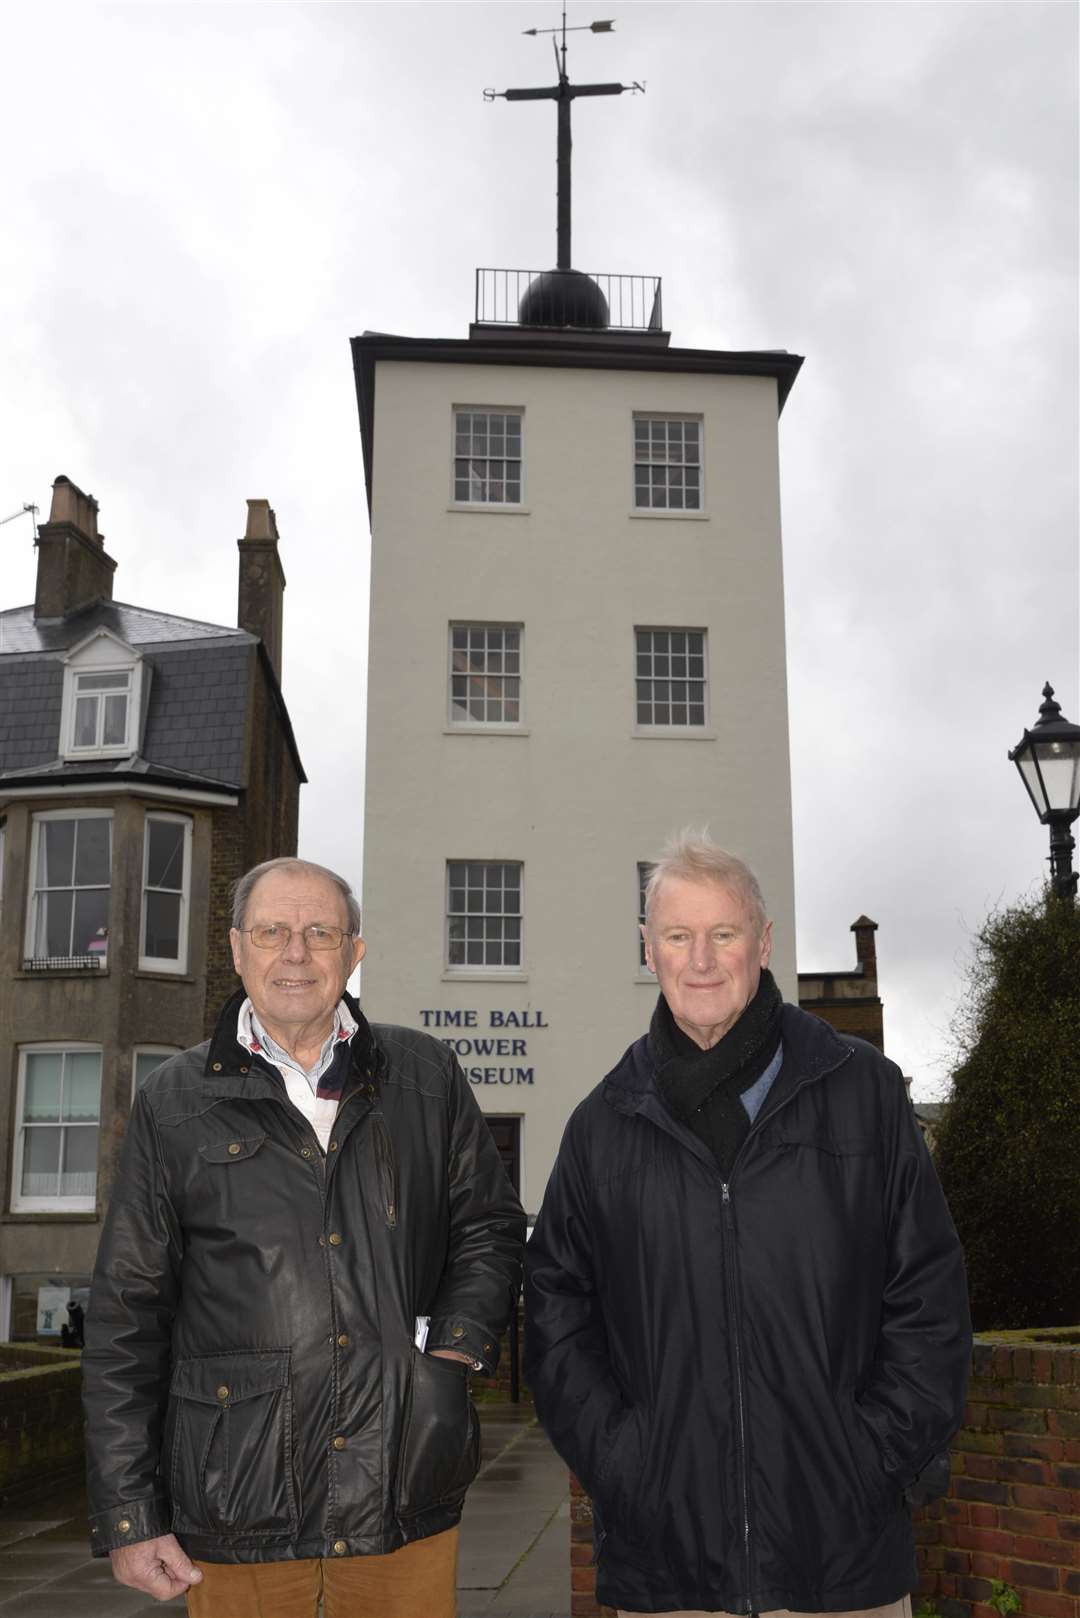 Mike Carey and Alan Clarke campaign to save the Timeball Tower as it is in financial difficulty